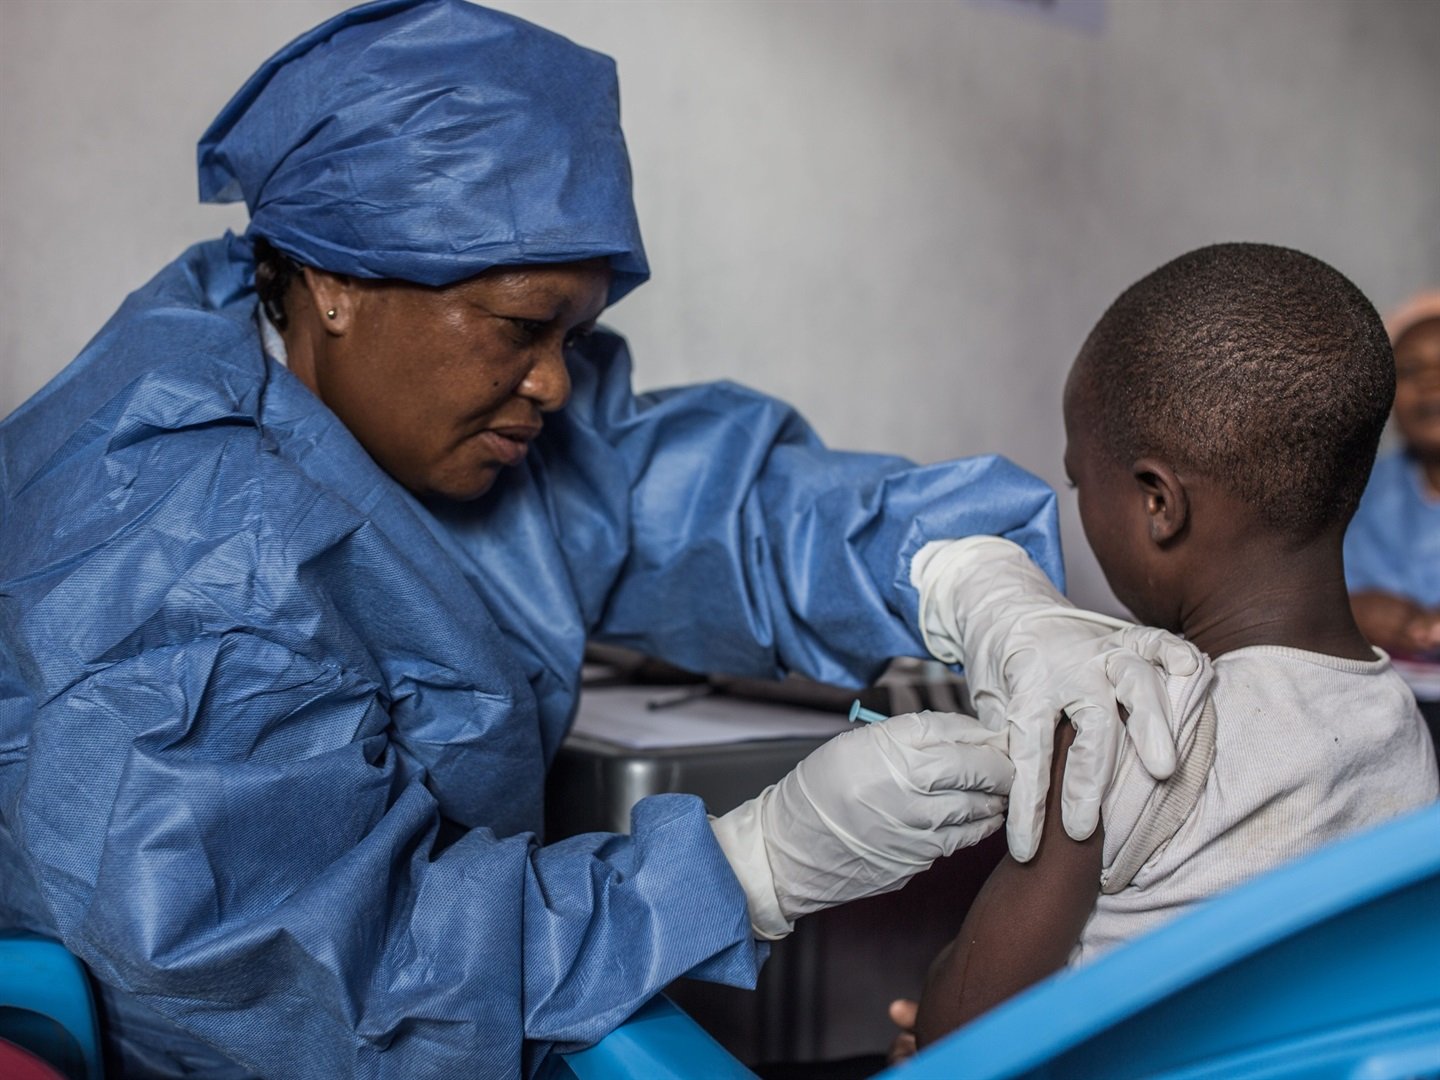 A girl gets inoculated with an Ebola vaccine on November 22, 2019 in Goma, the Democratic Republic of the Congo